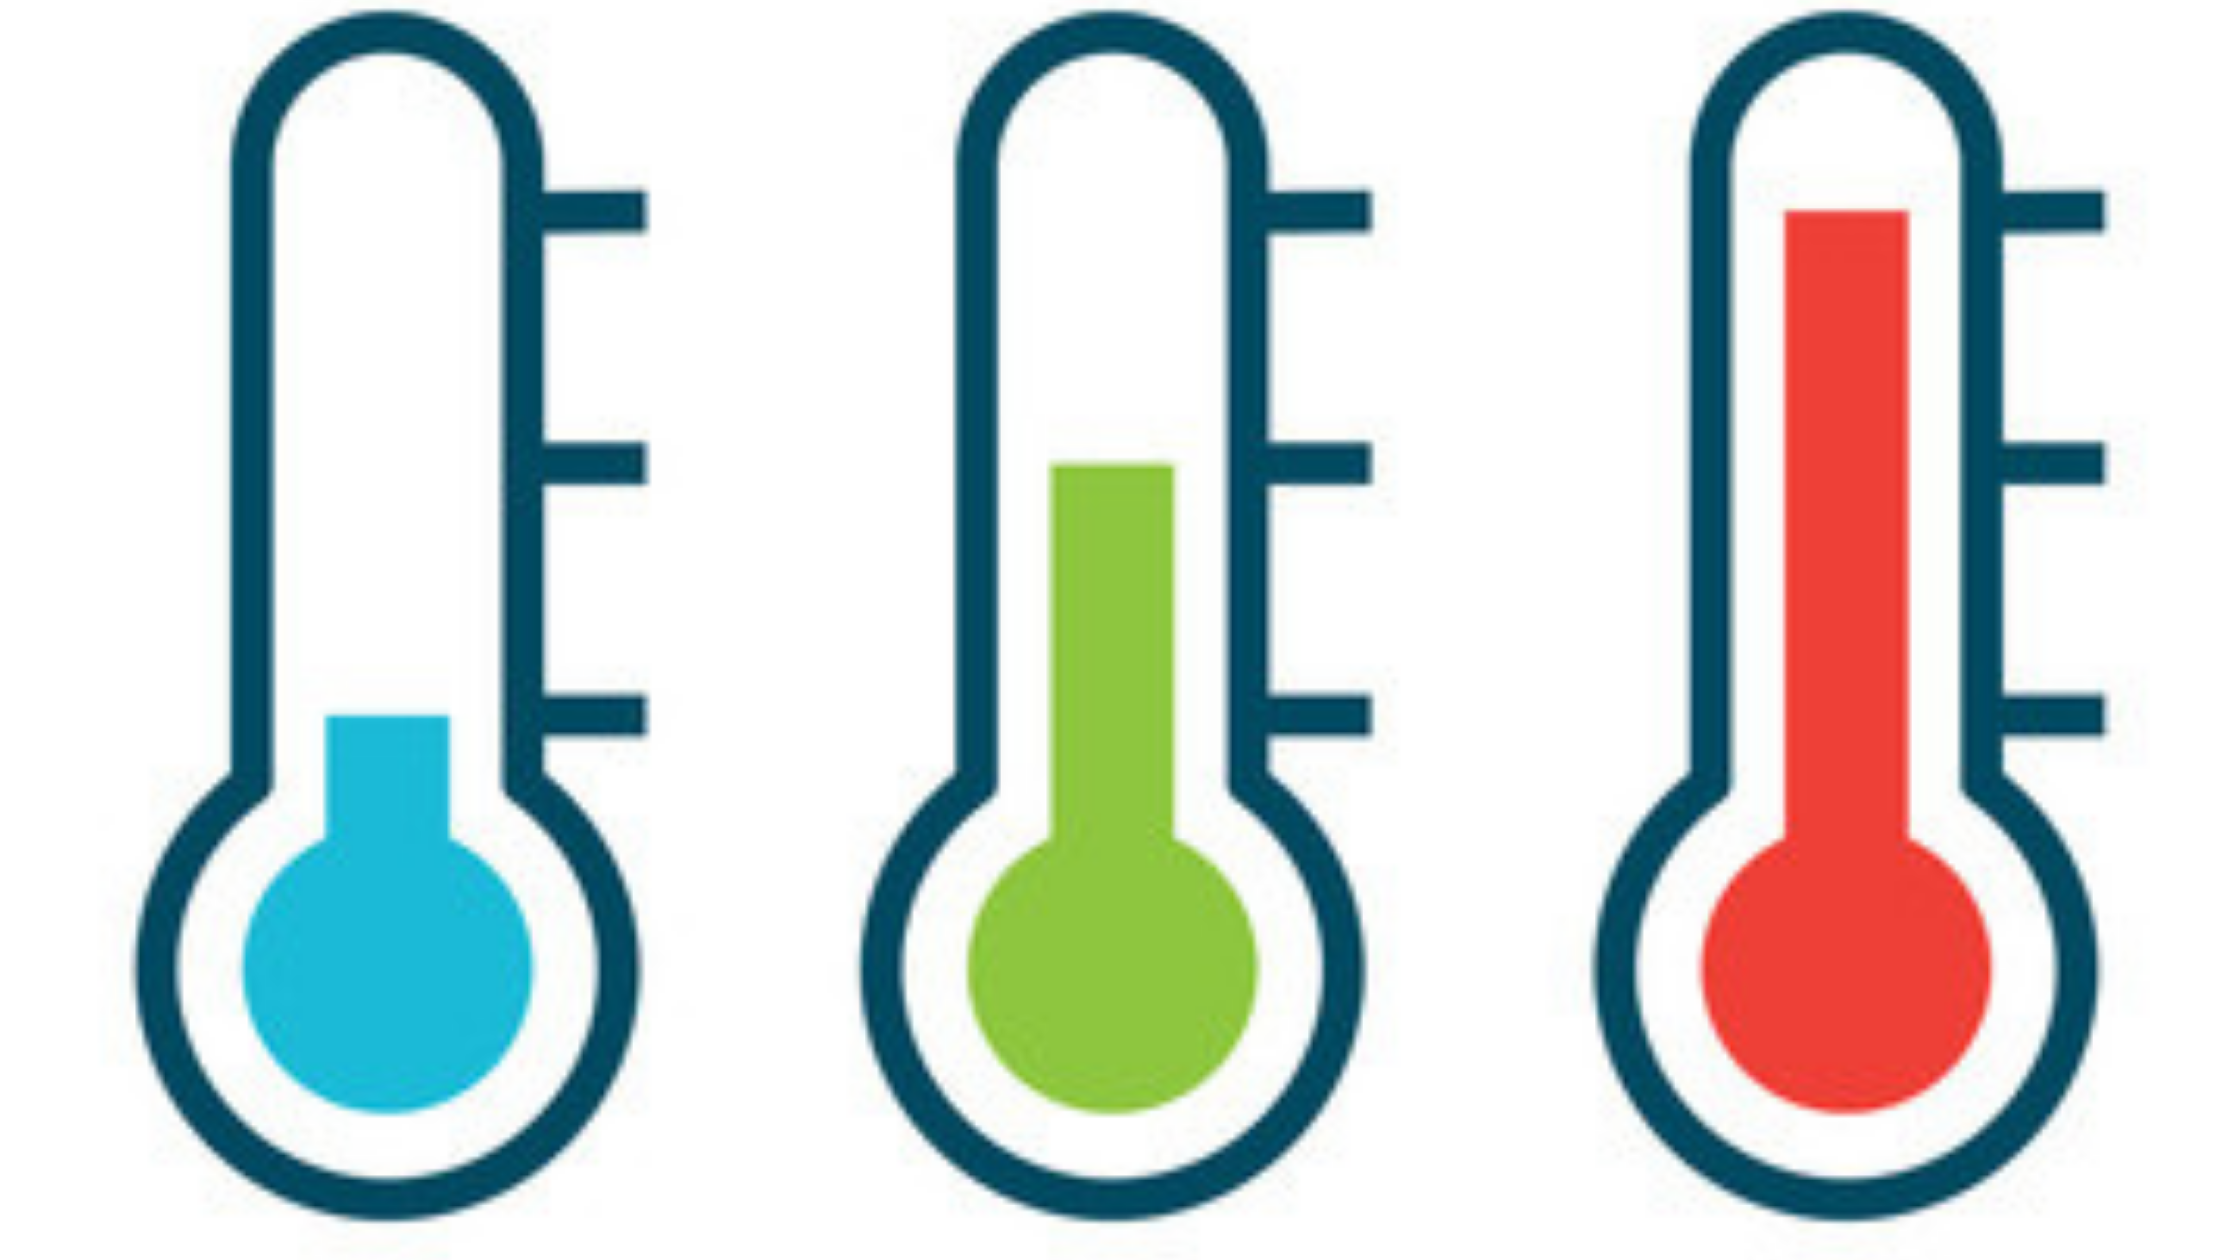 Graphic of 3 thermometers at different temps.